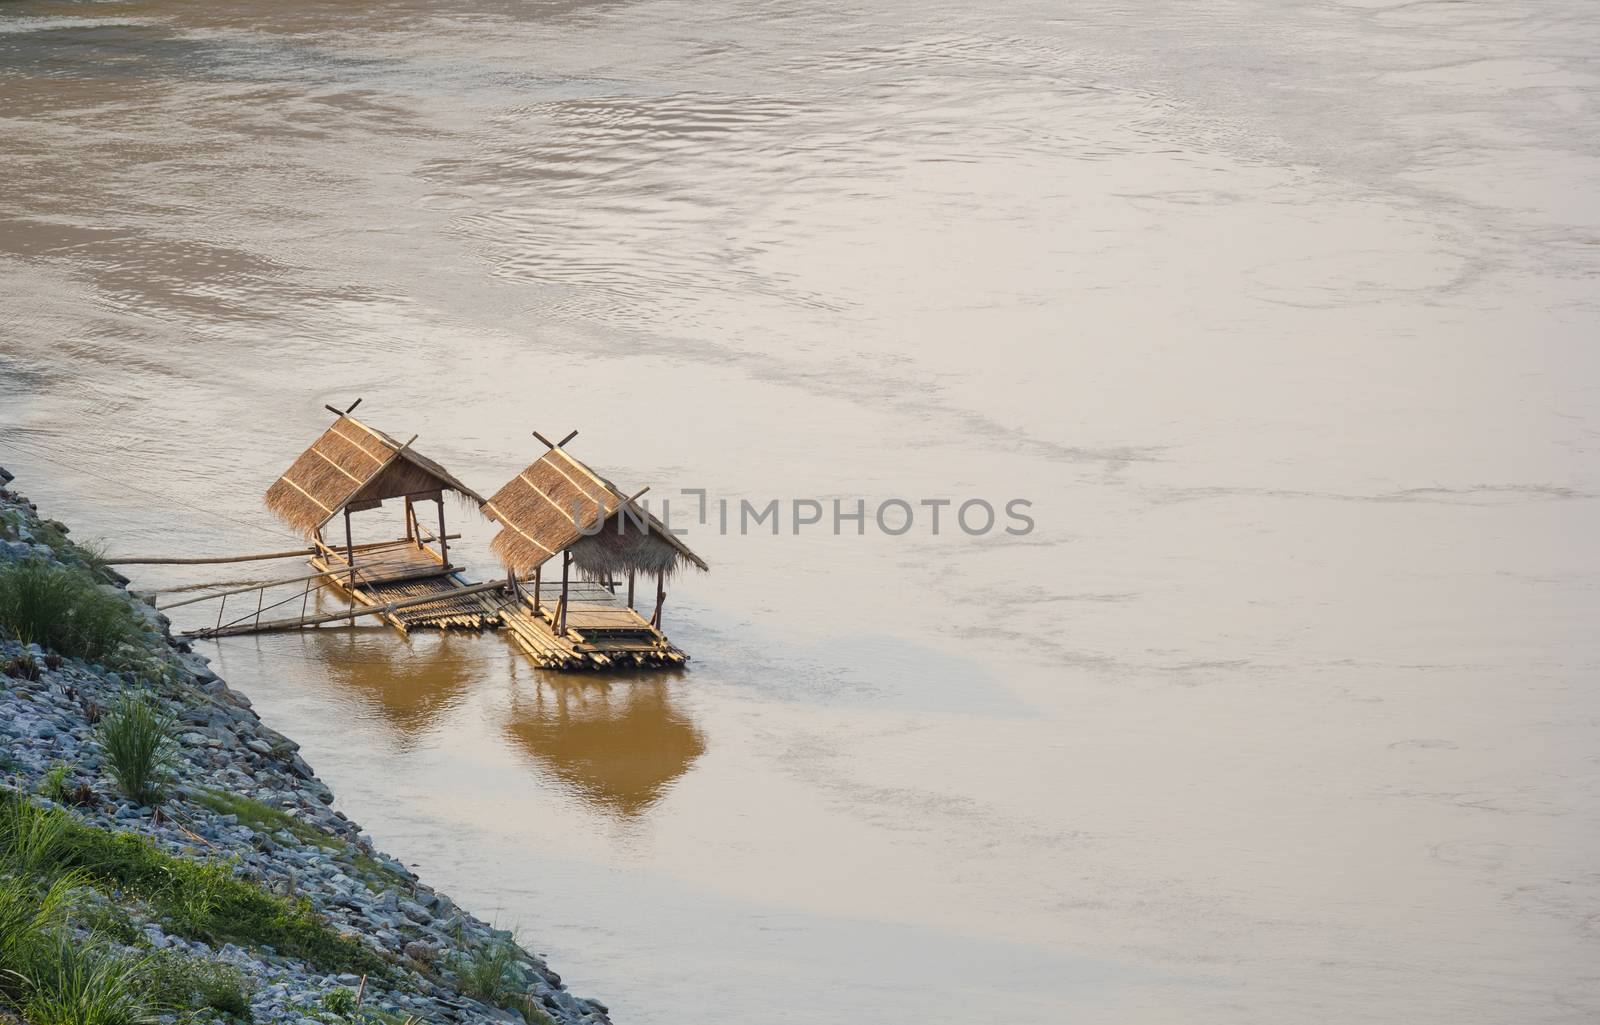 Bamboo Raft in mekong River by chingraph